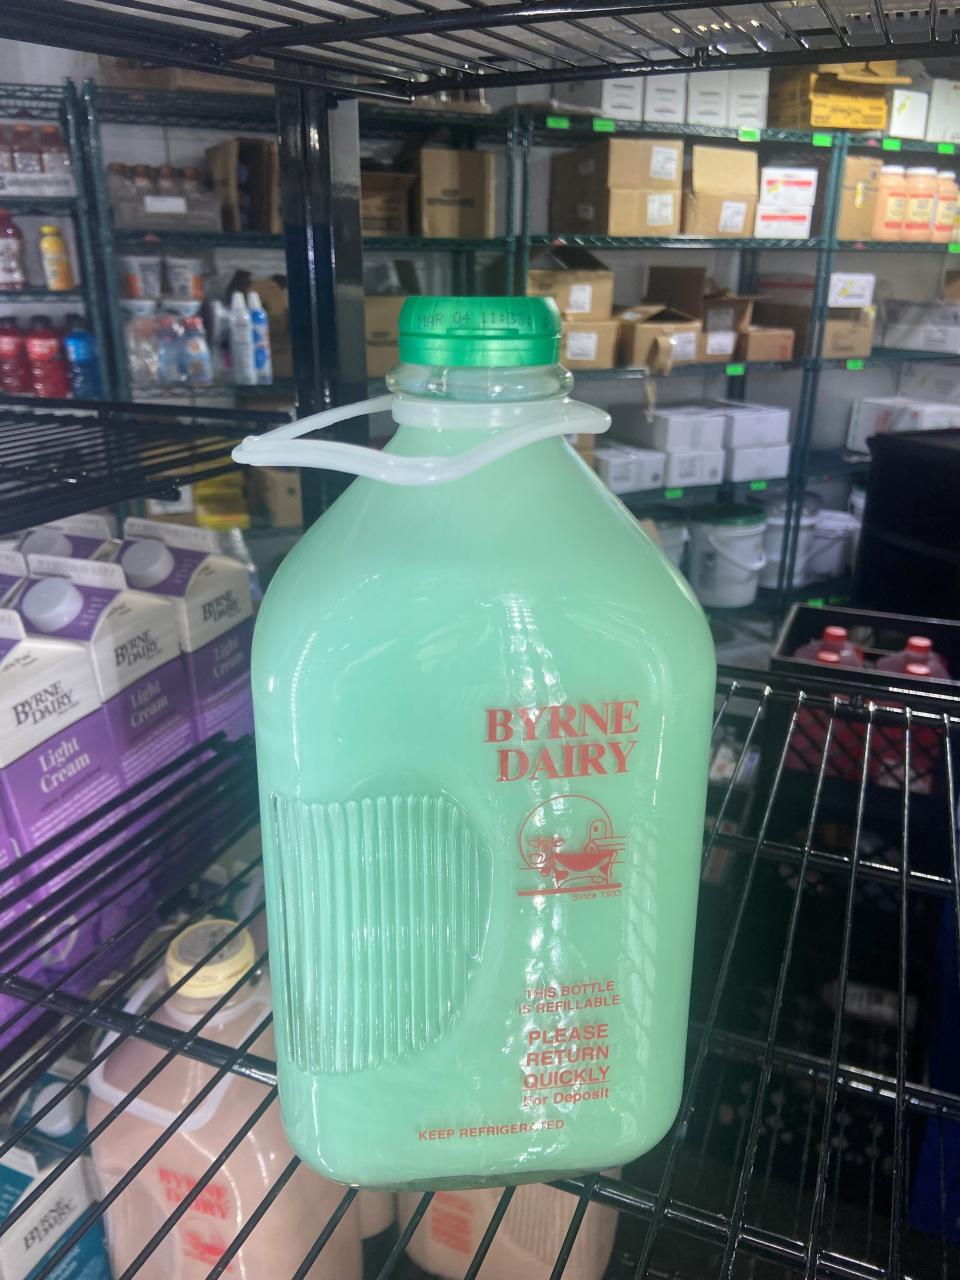 Byrne Dairy makes and sells Irish mint milk for several weeks around St. Patrick's Day each year. The specialty milk is sold in glass half-gallon containers starting in late February through St. Patrick's Day.